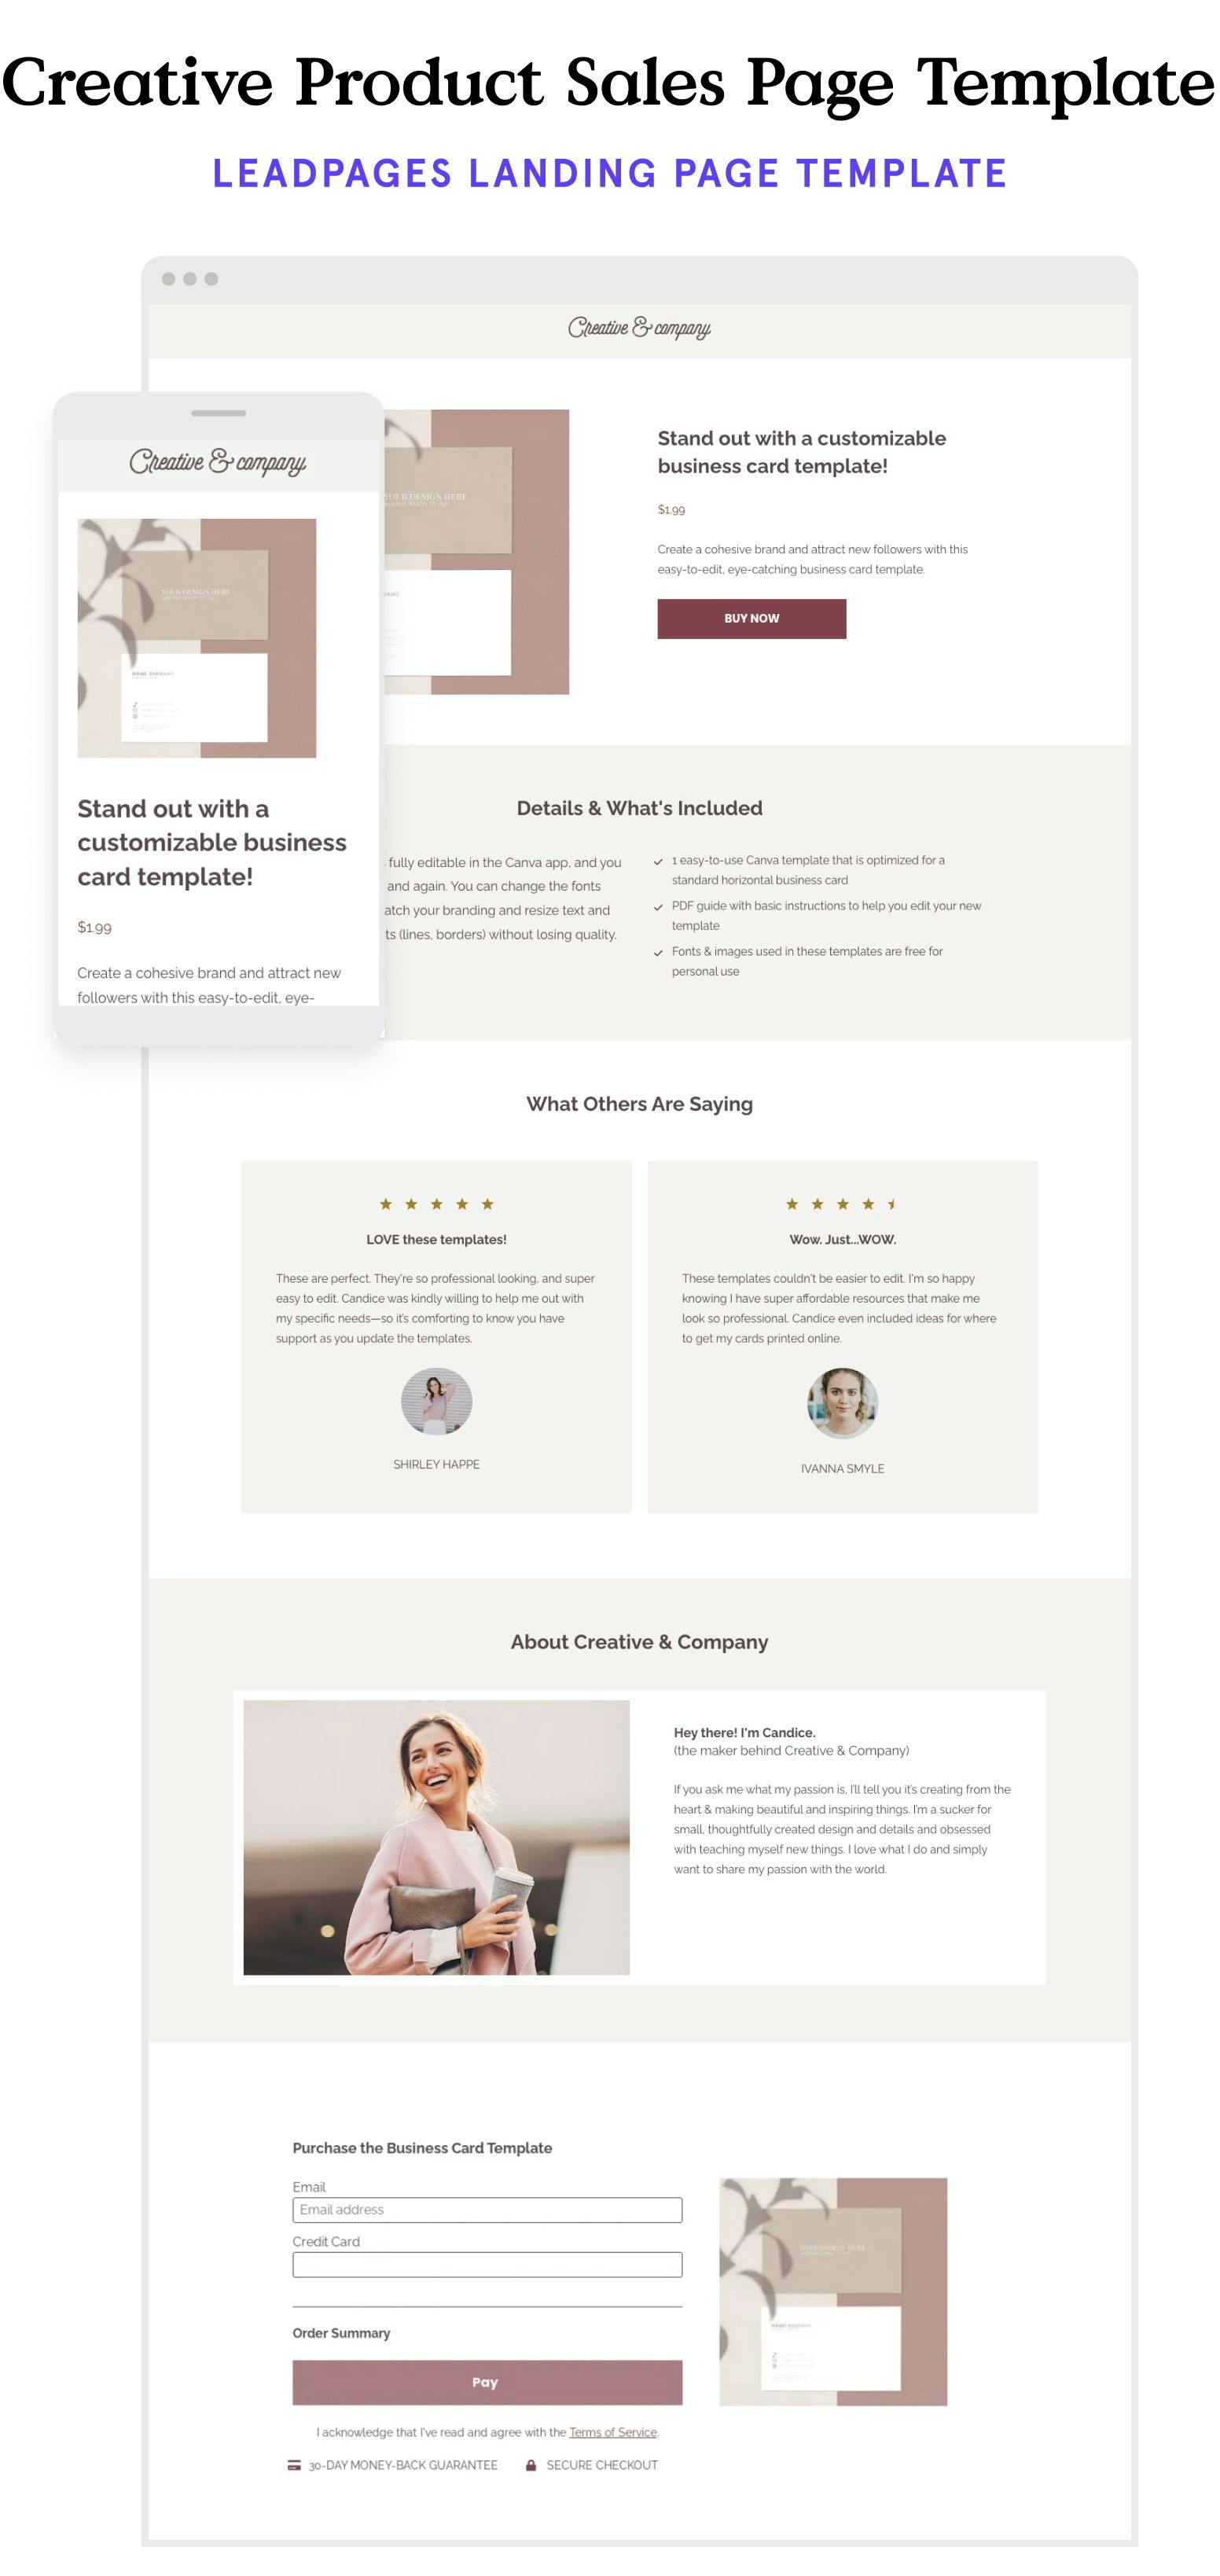 Creative product landing page template